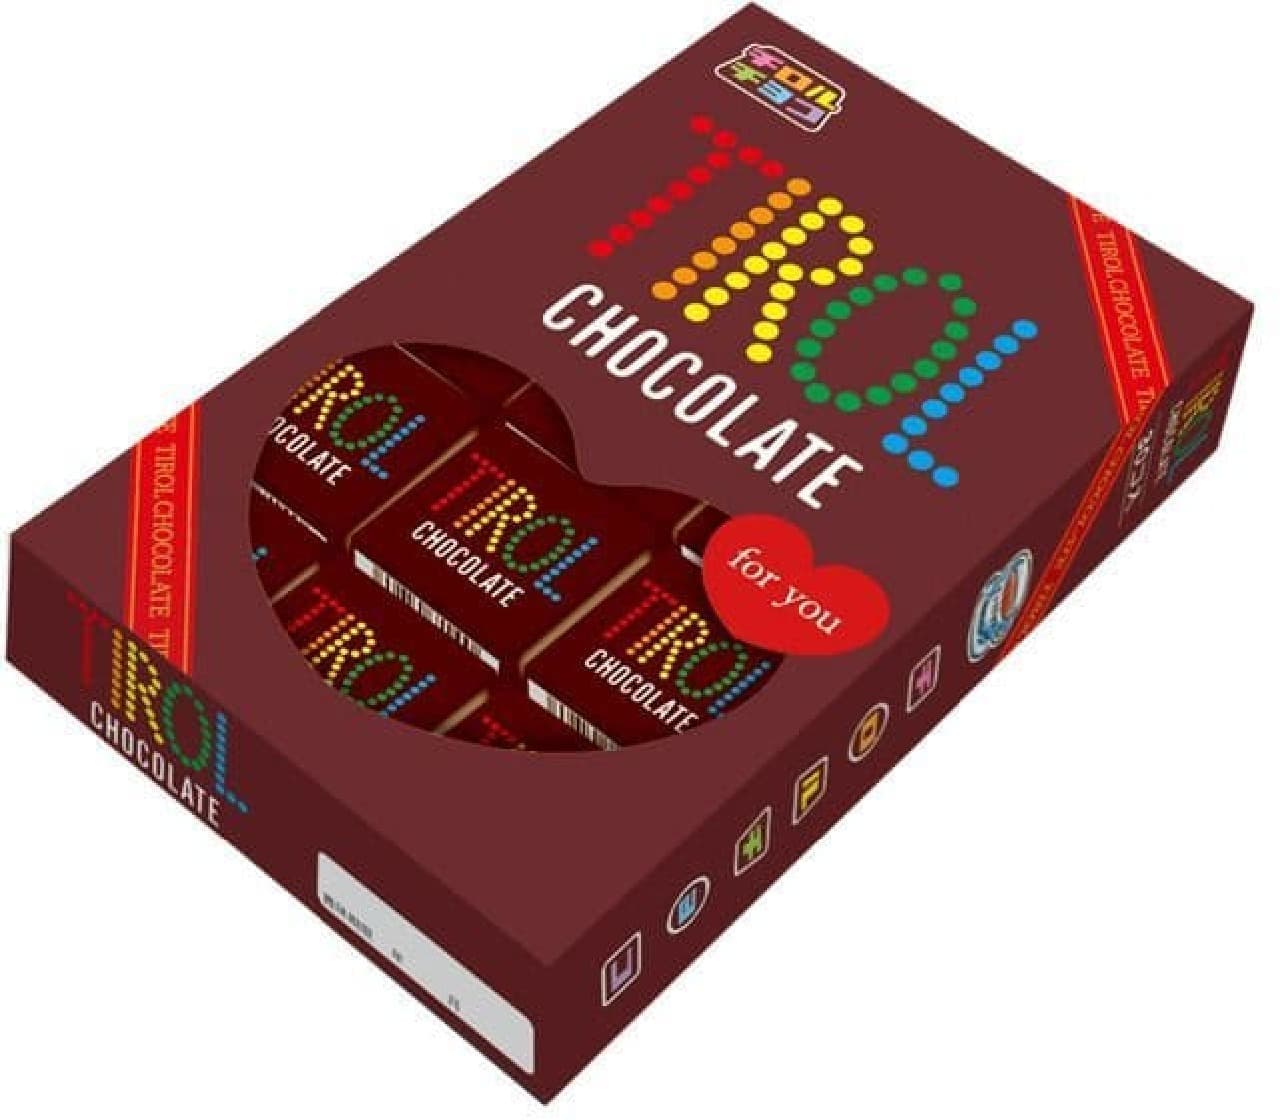 Tyrolean chocolate new product "Coffee Nougat BOX"